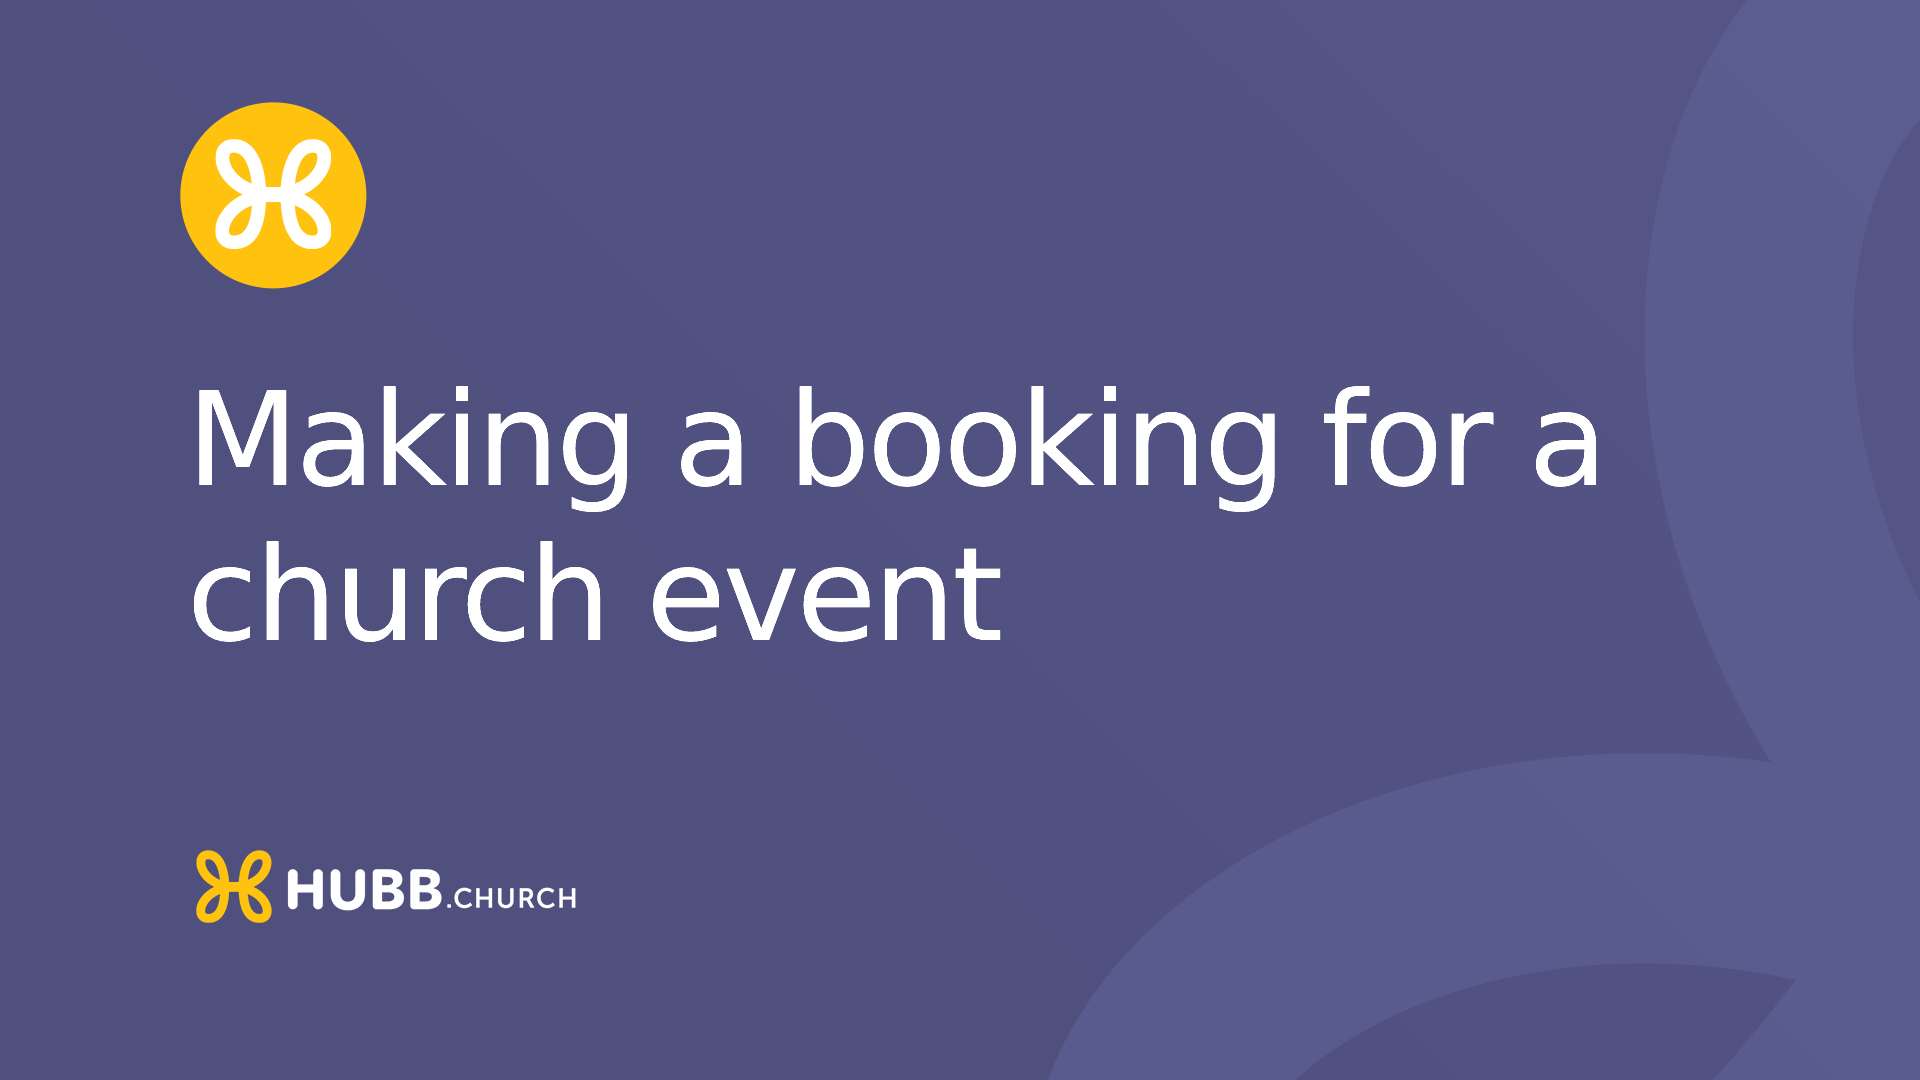 Making a booking for a church event